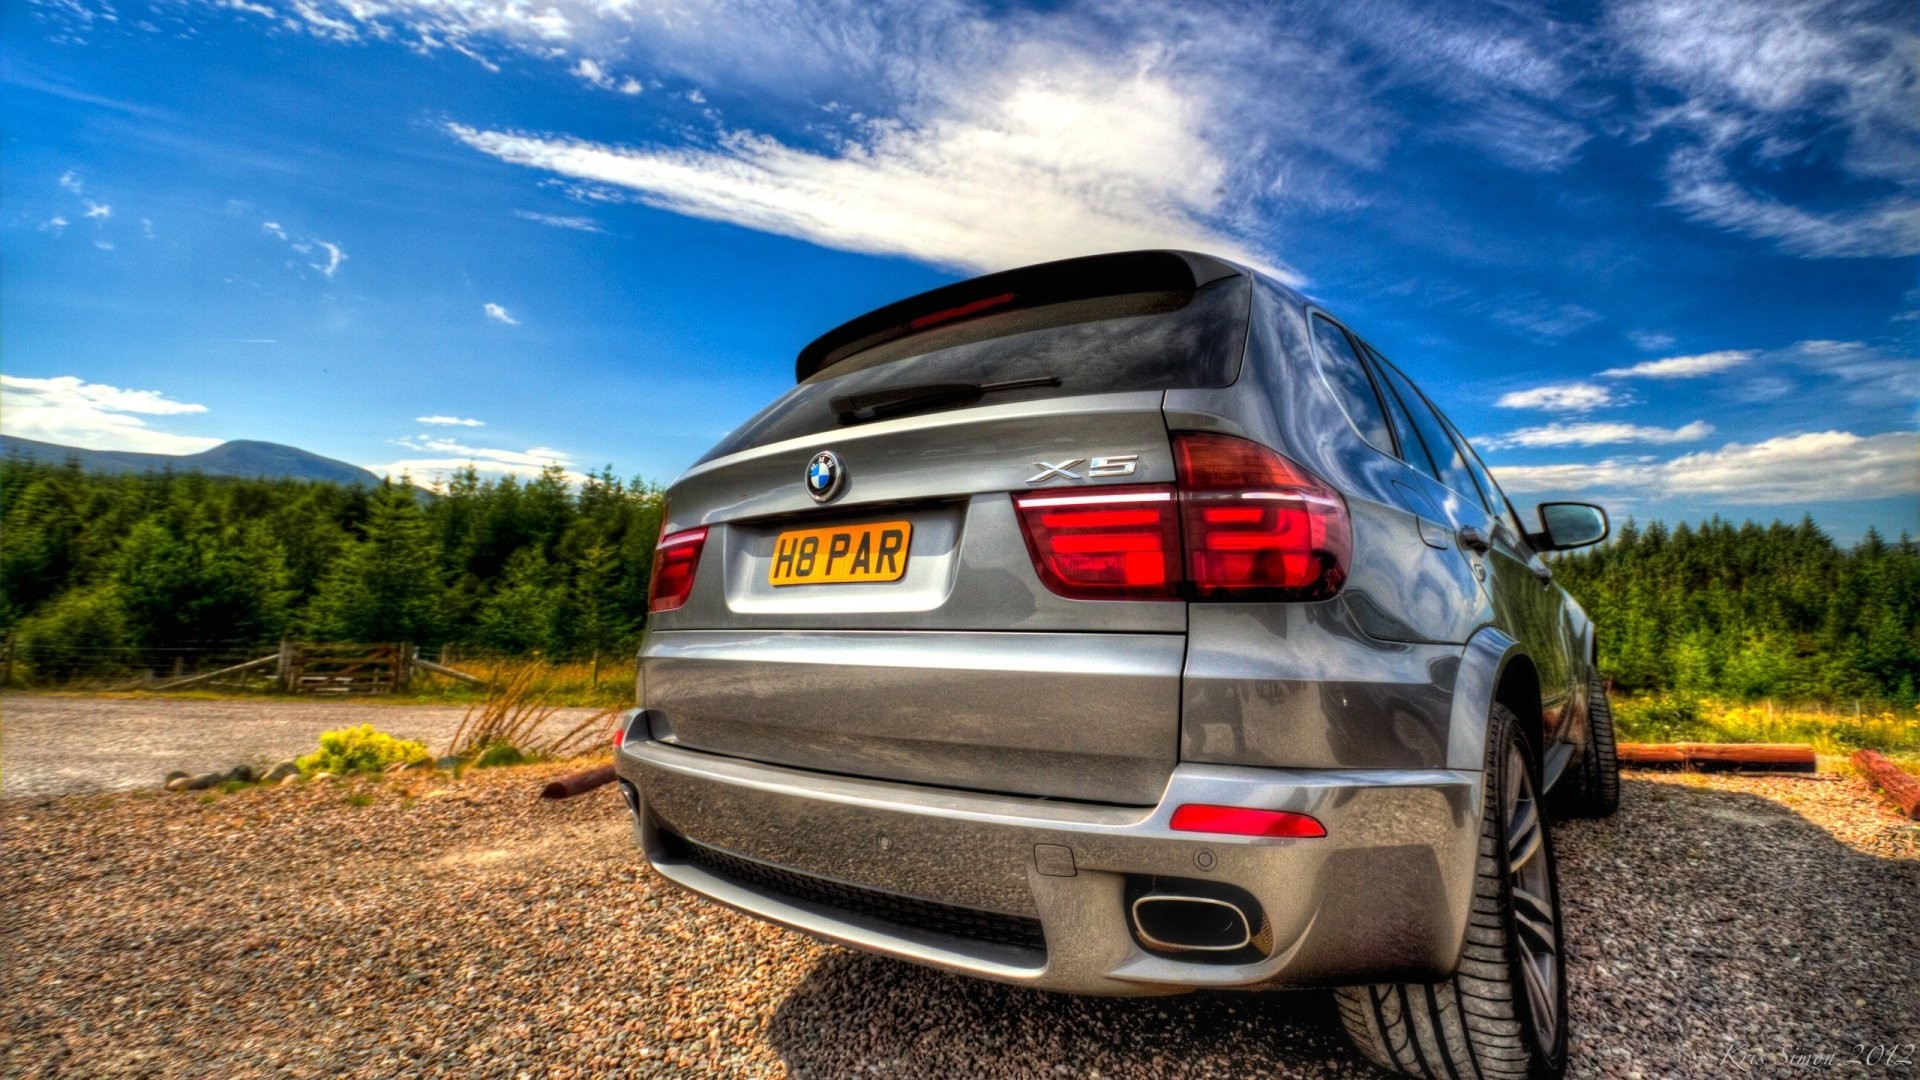 BMW, BMW X5, Car, Clouds, Forest, HDR Wallpaper